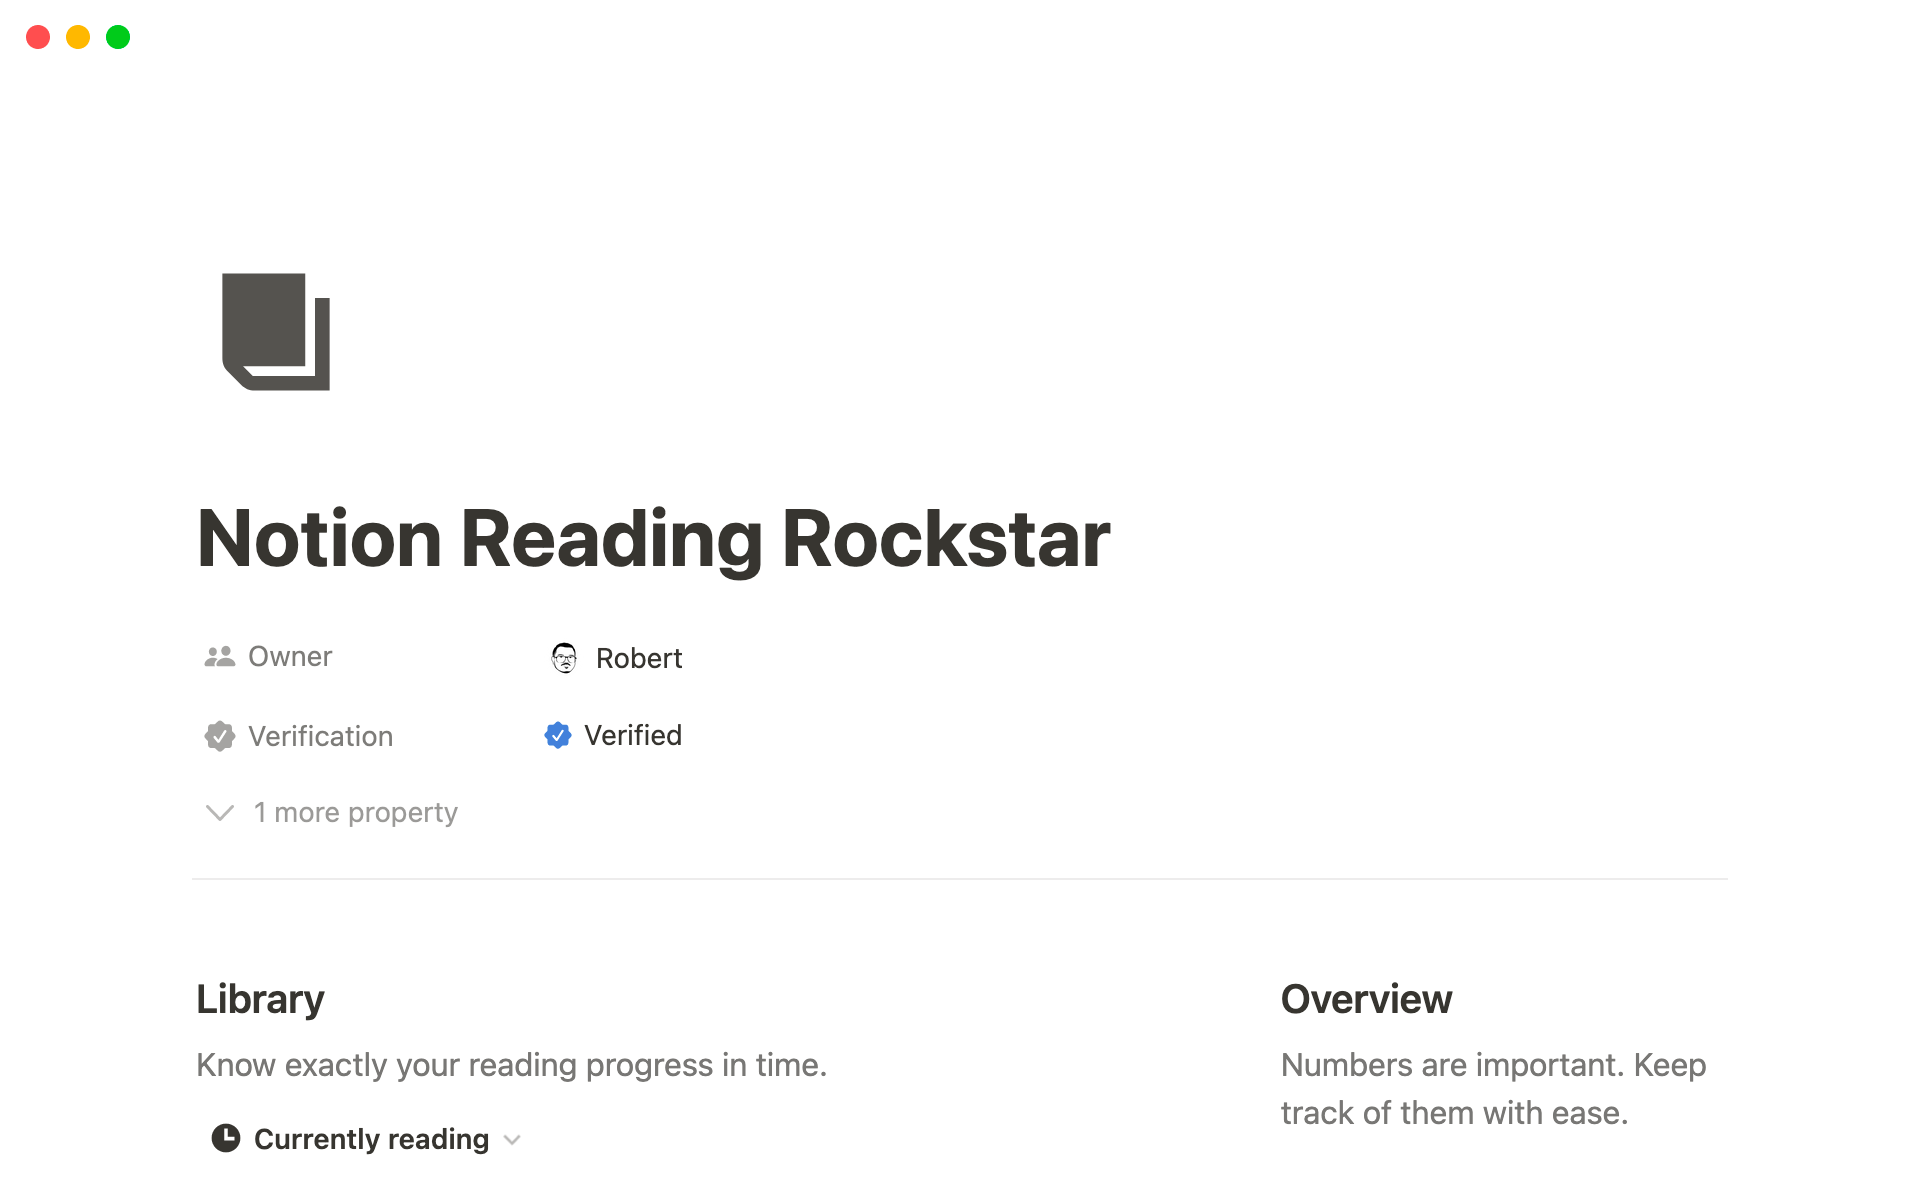 The Notion Reading Rockstar template empowers individuals to take control of their reading habits and maximize their reading productivity.